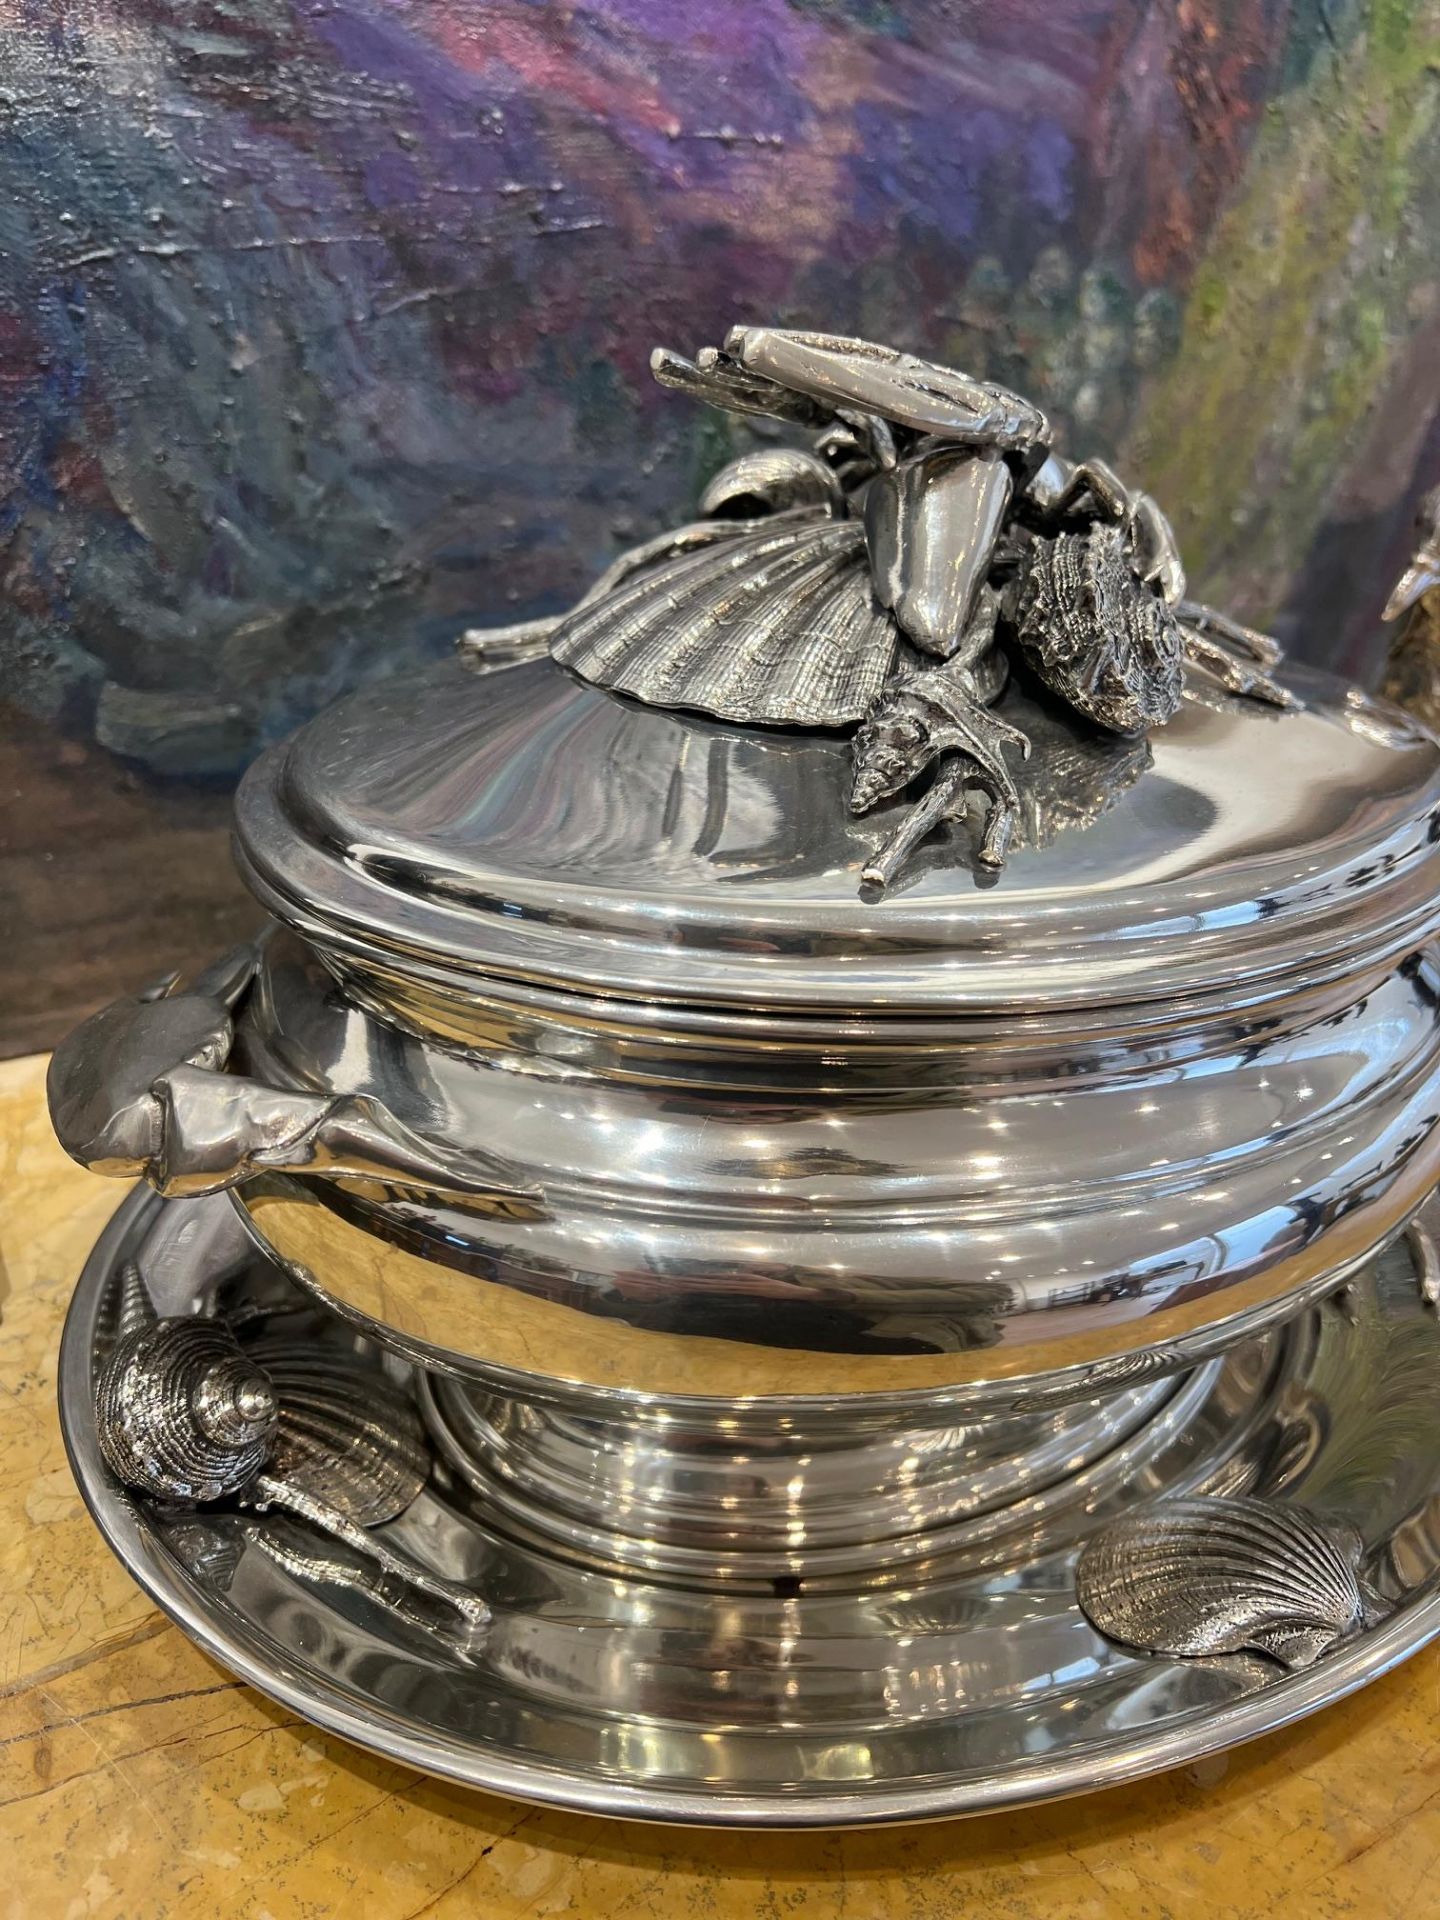 A LARGE ITALIAN SILVER PLATED SOUP TUREEN IN THE STYLE OF BUCCELLATI - Image 5 of 11